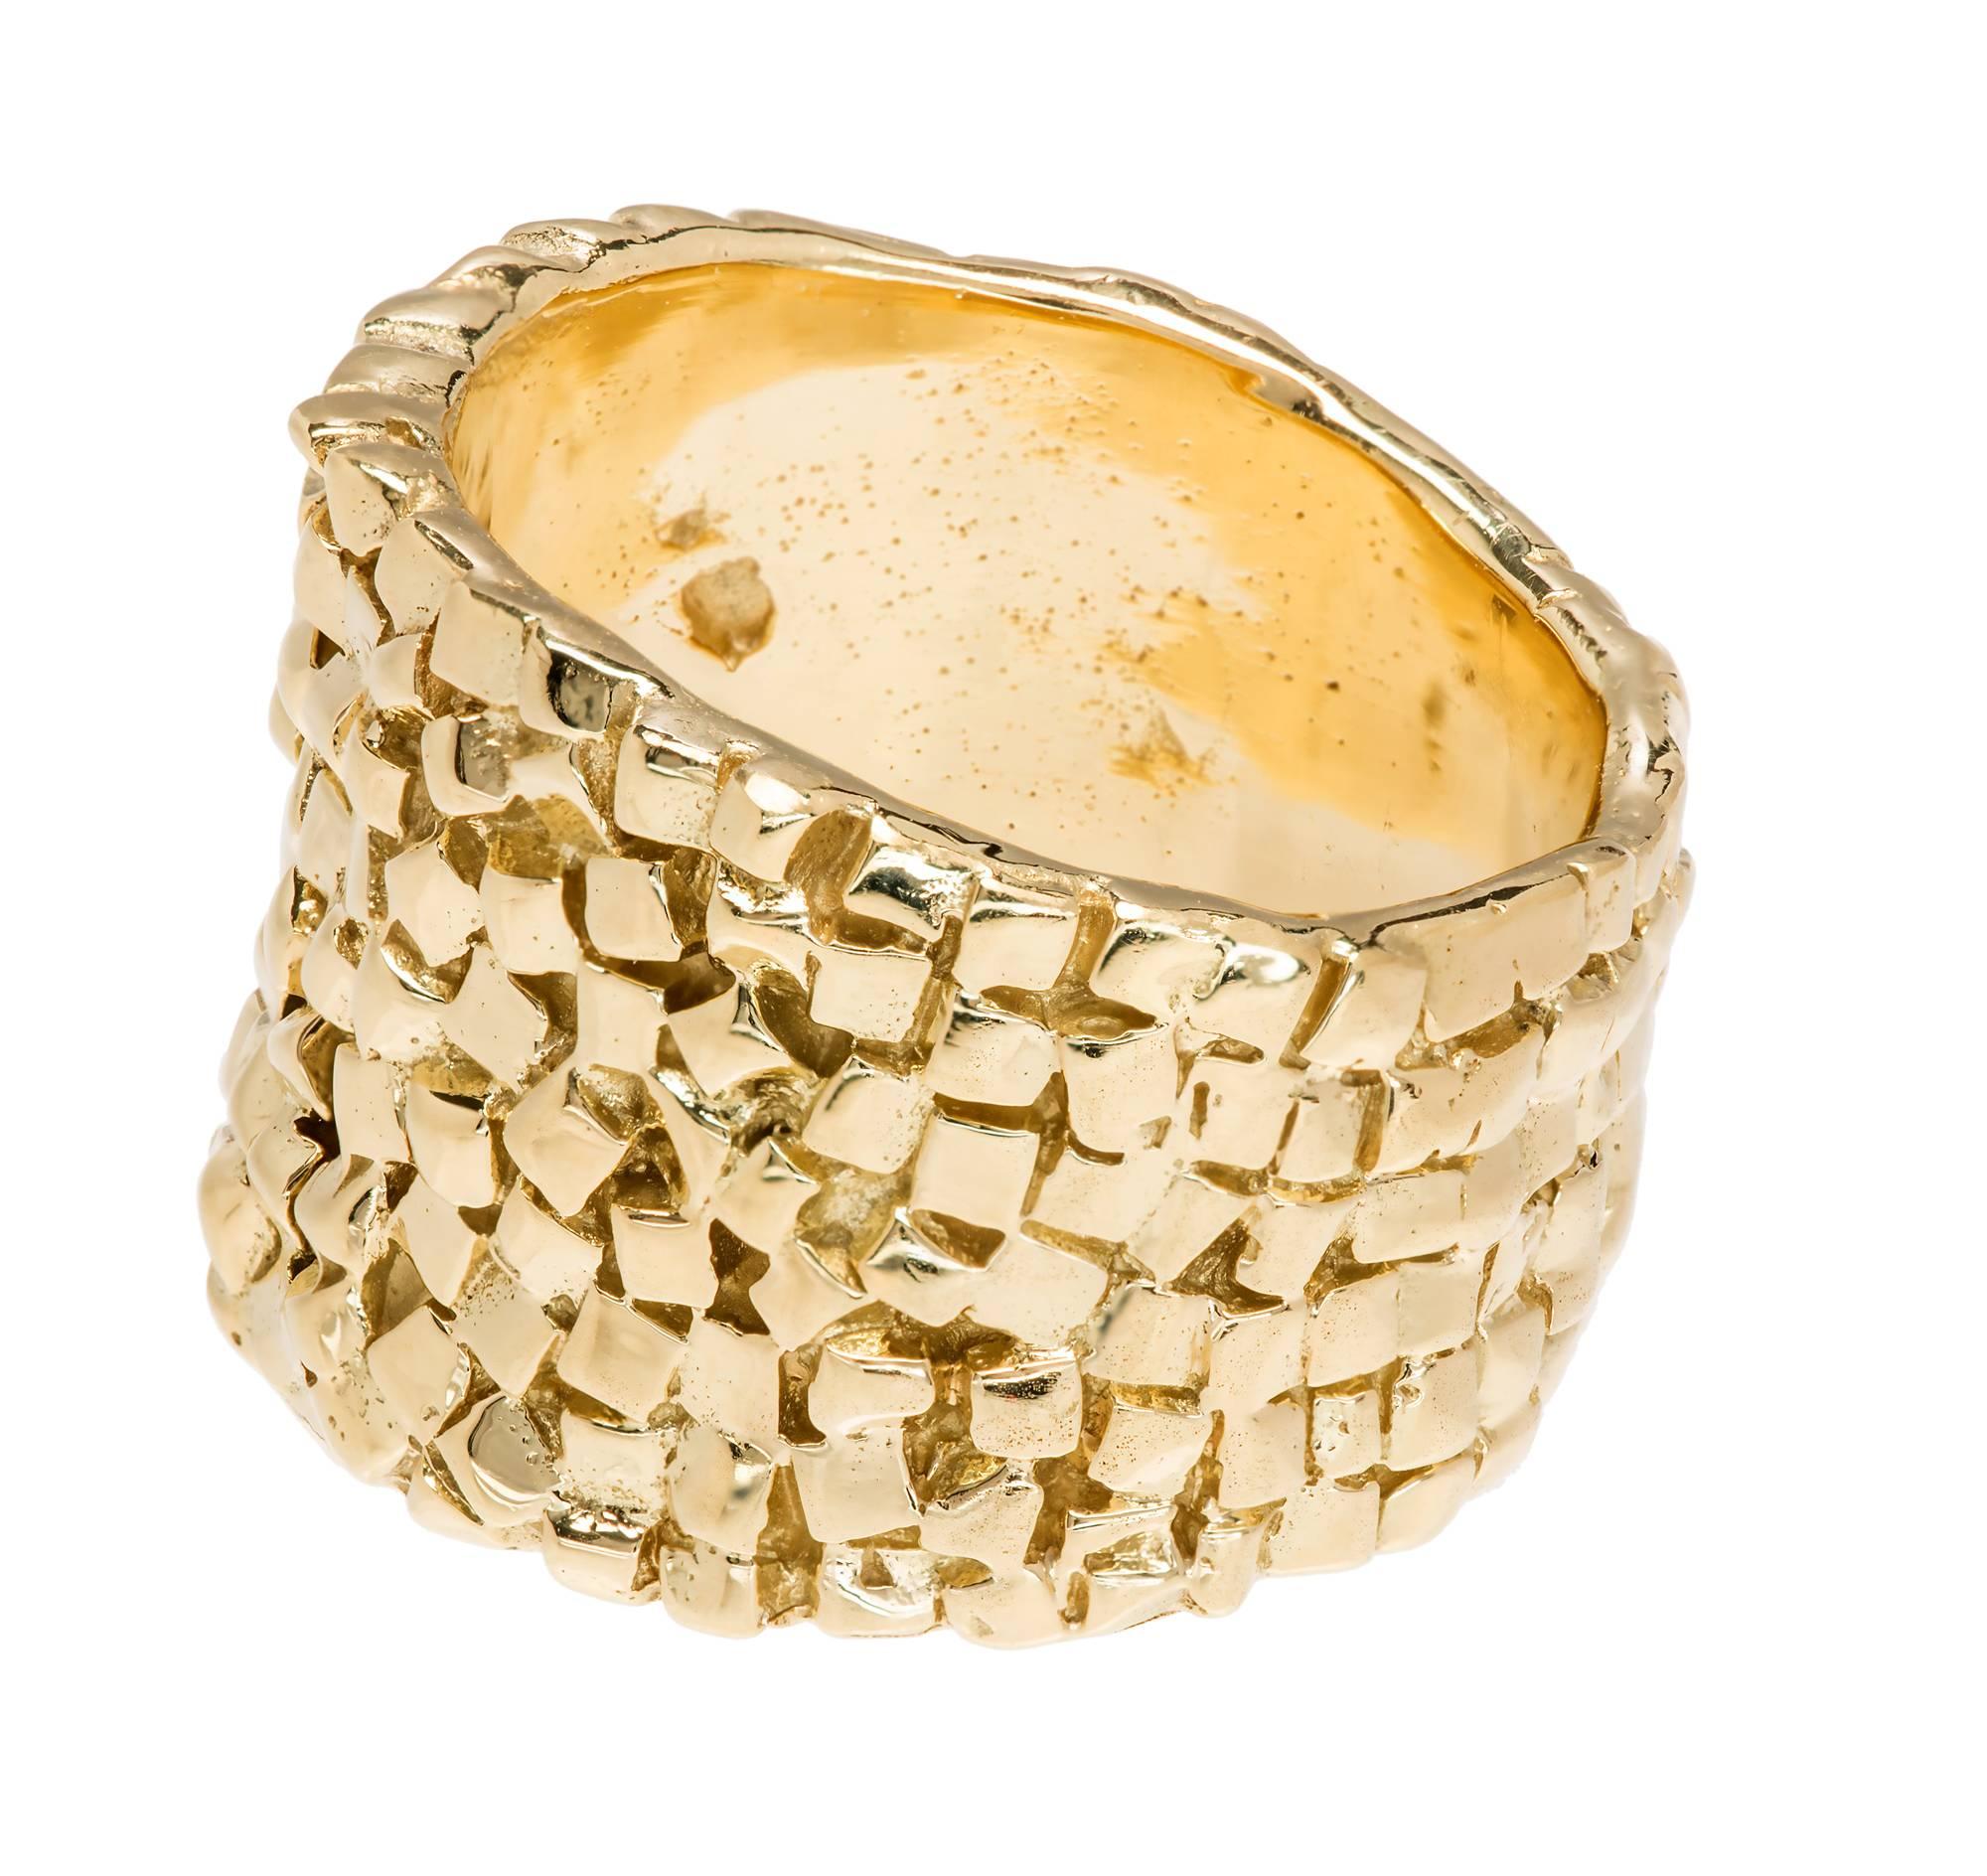 Custom made woven design 18k yellow gold ring.

18k yellow gold
Size 5.5 and not easily sized
14.8 grams
Width at top: 14.59mm
Height at top: 2.52mm
Width at Bottom: 10.40mm


